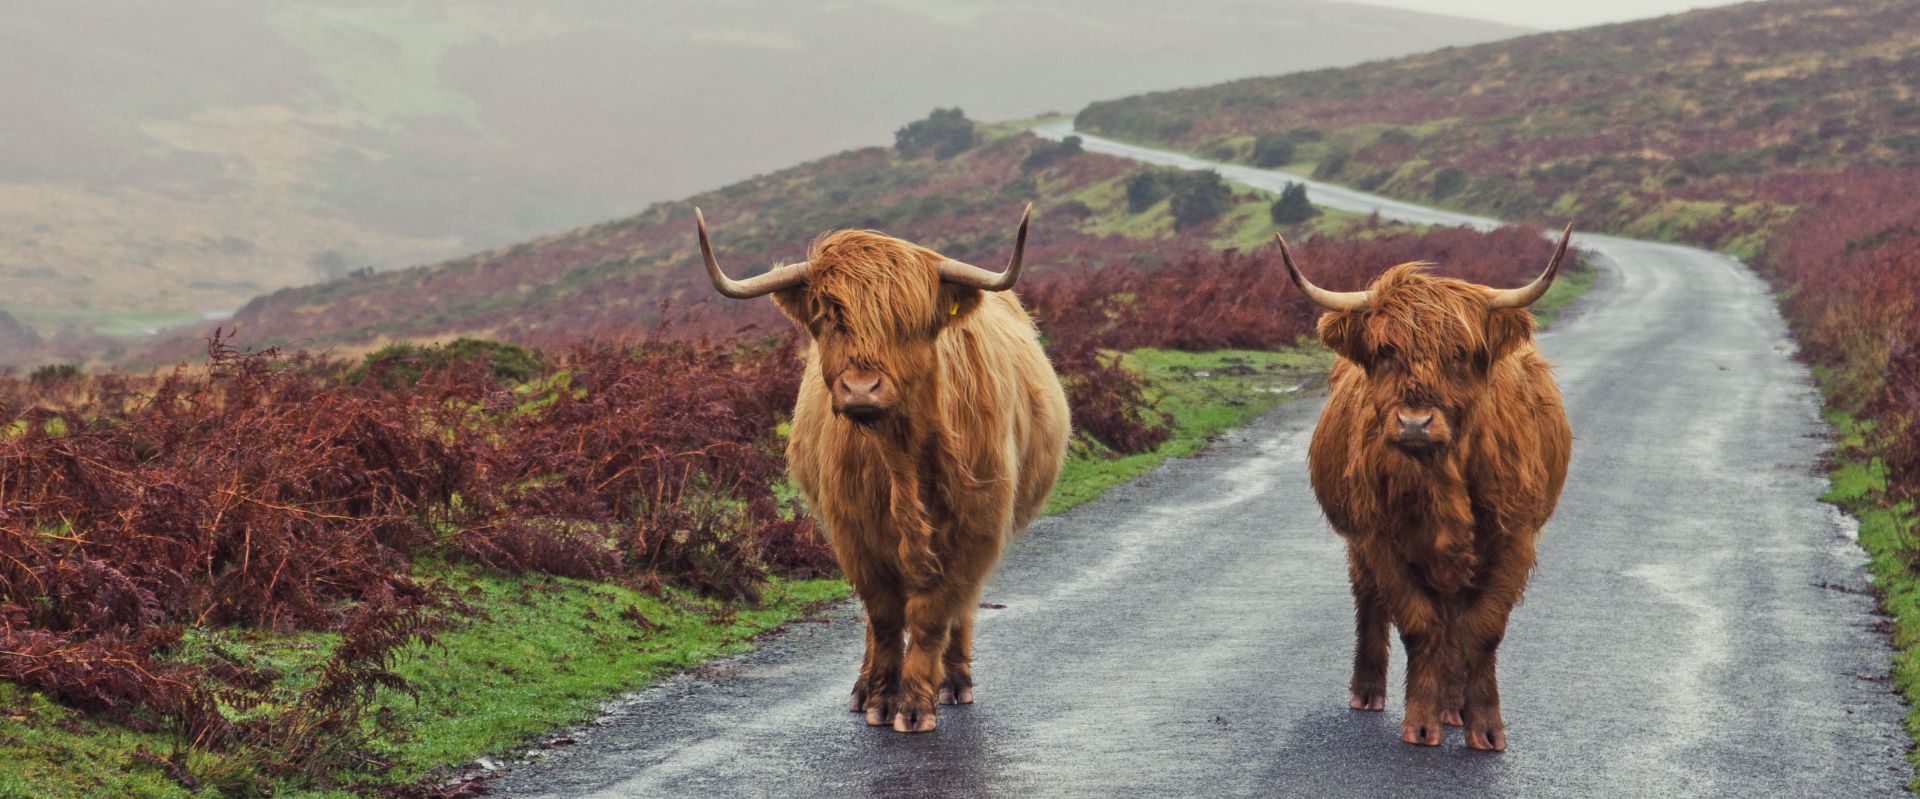 Highland Cattle on Dartmoor seen during Hound of the Baskervilles Tour